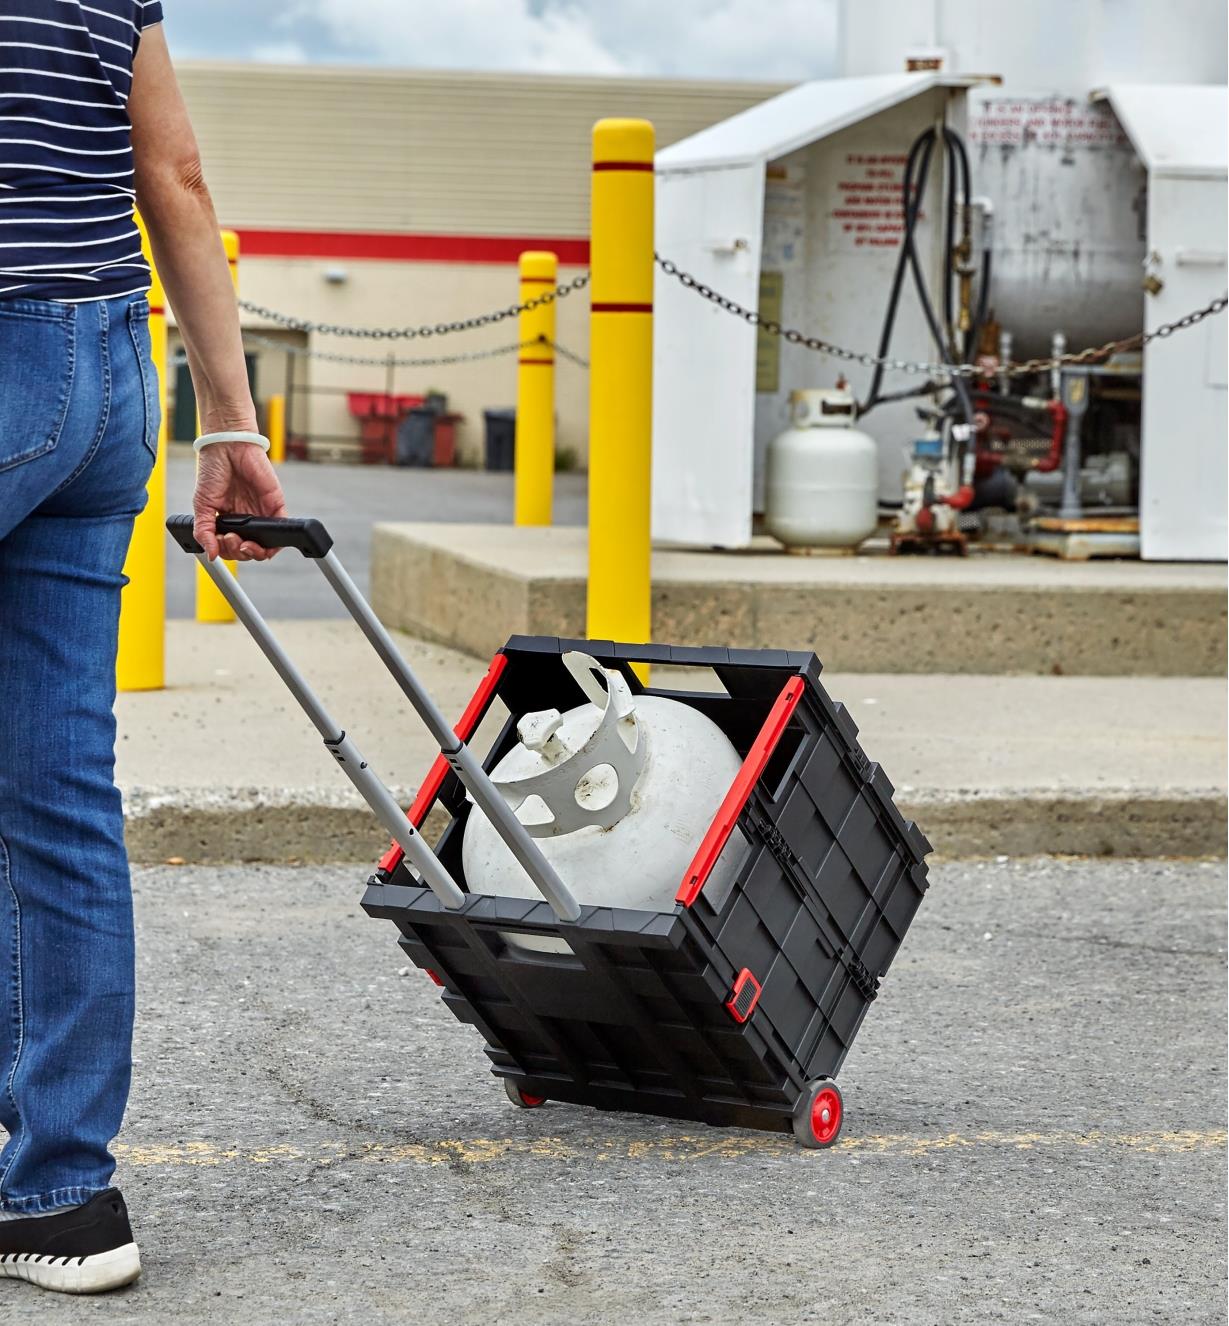 A person at a propane filling station pulls a collapsible cart containing a 20 pound propane tank